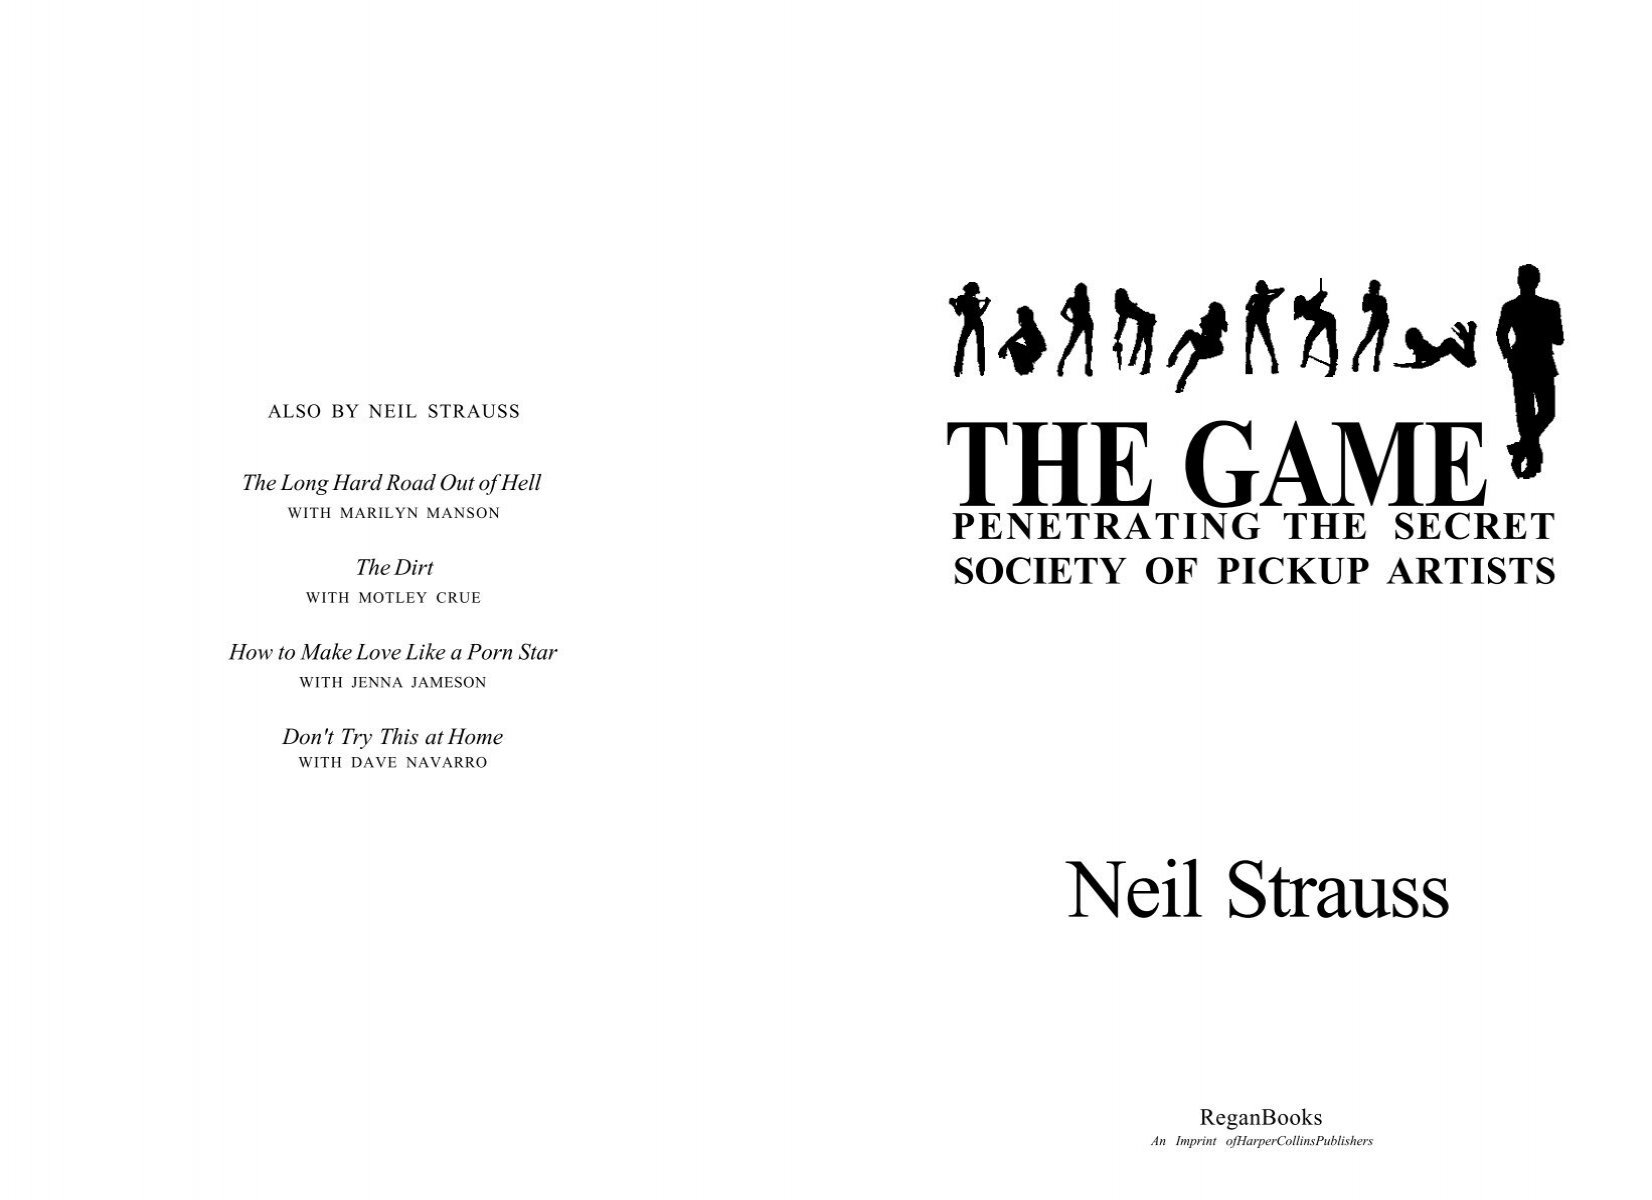 the game penetrating the secret society of pickup artists - Conspirazzi